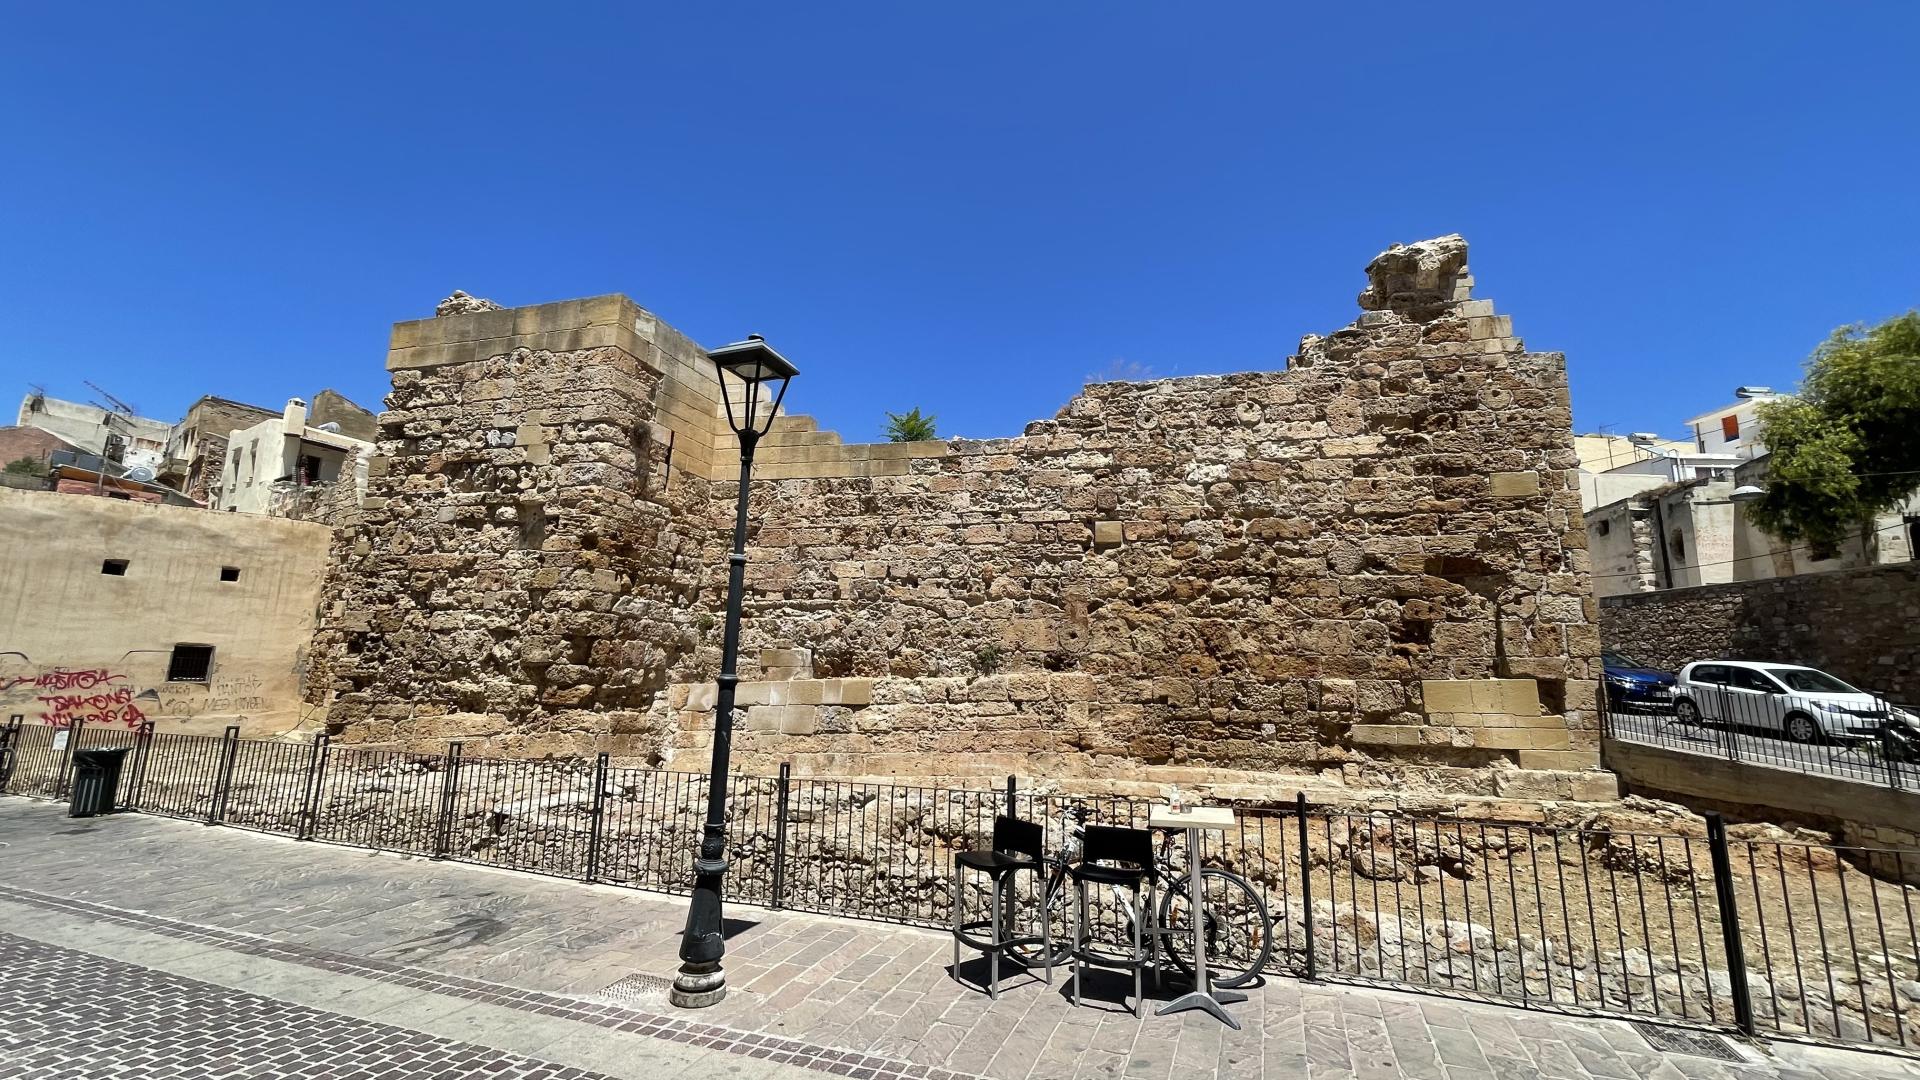 Kydonia - The Ancient City of Chania (remains next to the old city wall)